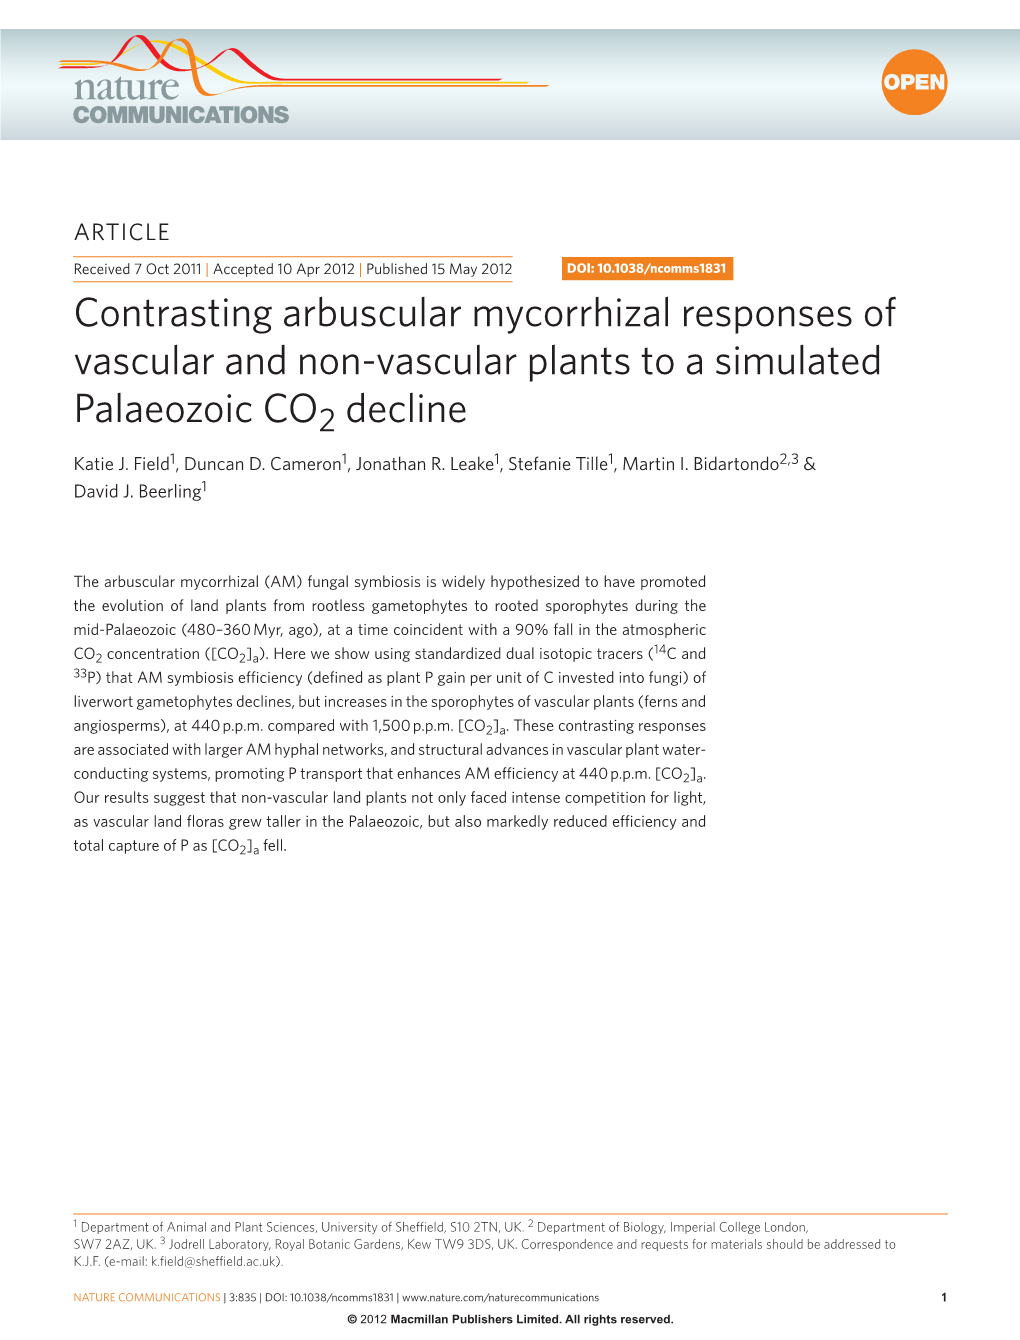 Contrasting Arbuscular Mycorrhizal Responses of Vascular and Non-Vascular Plants to a Simulated Palaeozoic CO2 Decline Katie J